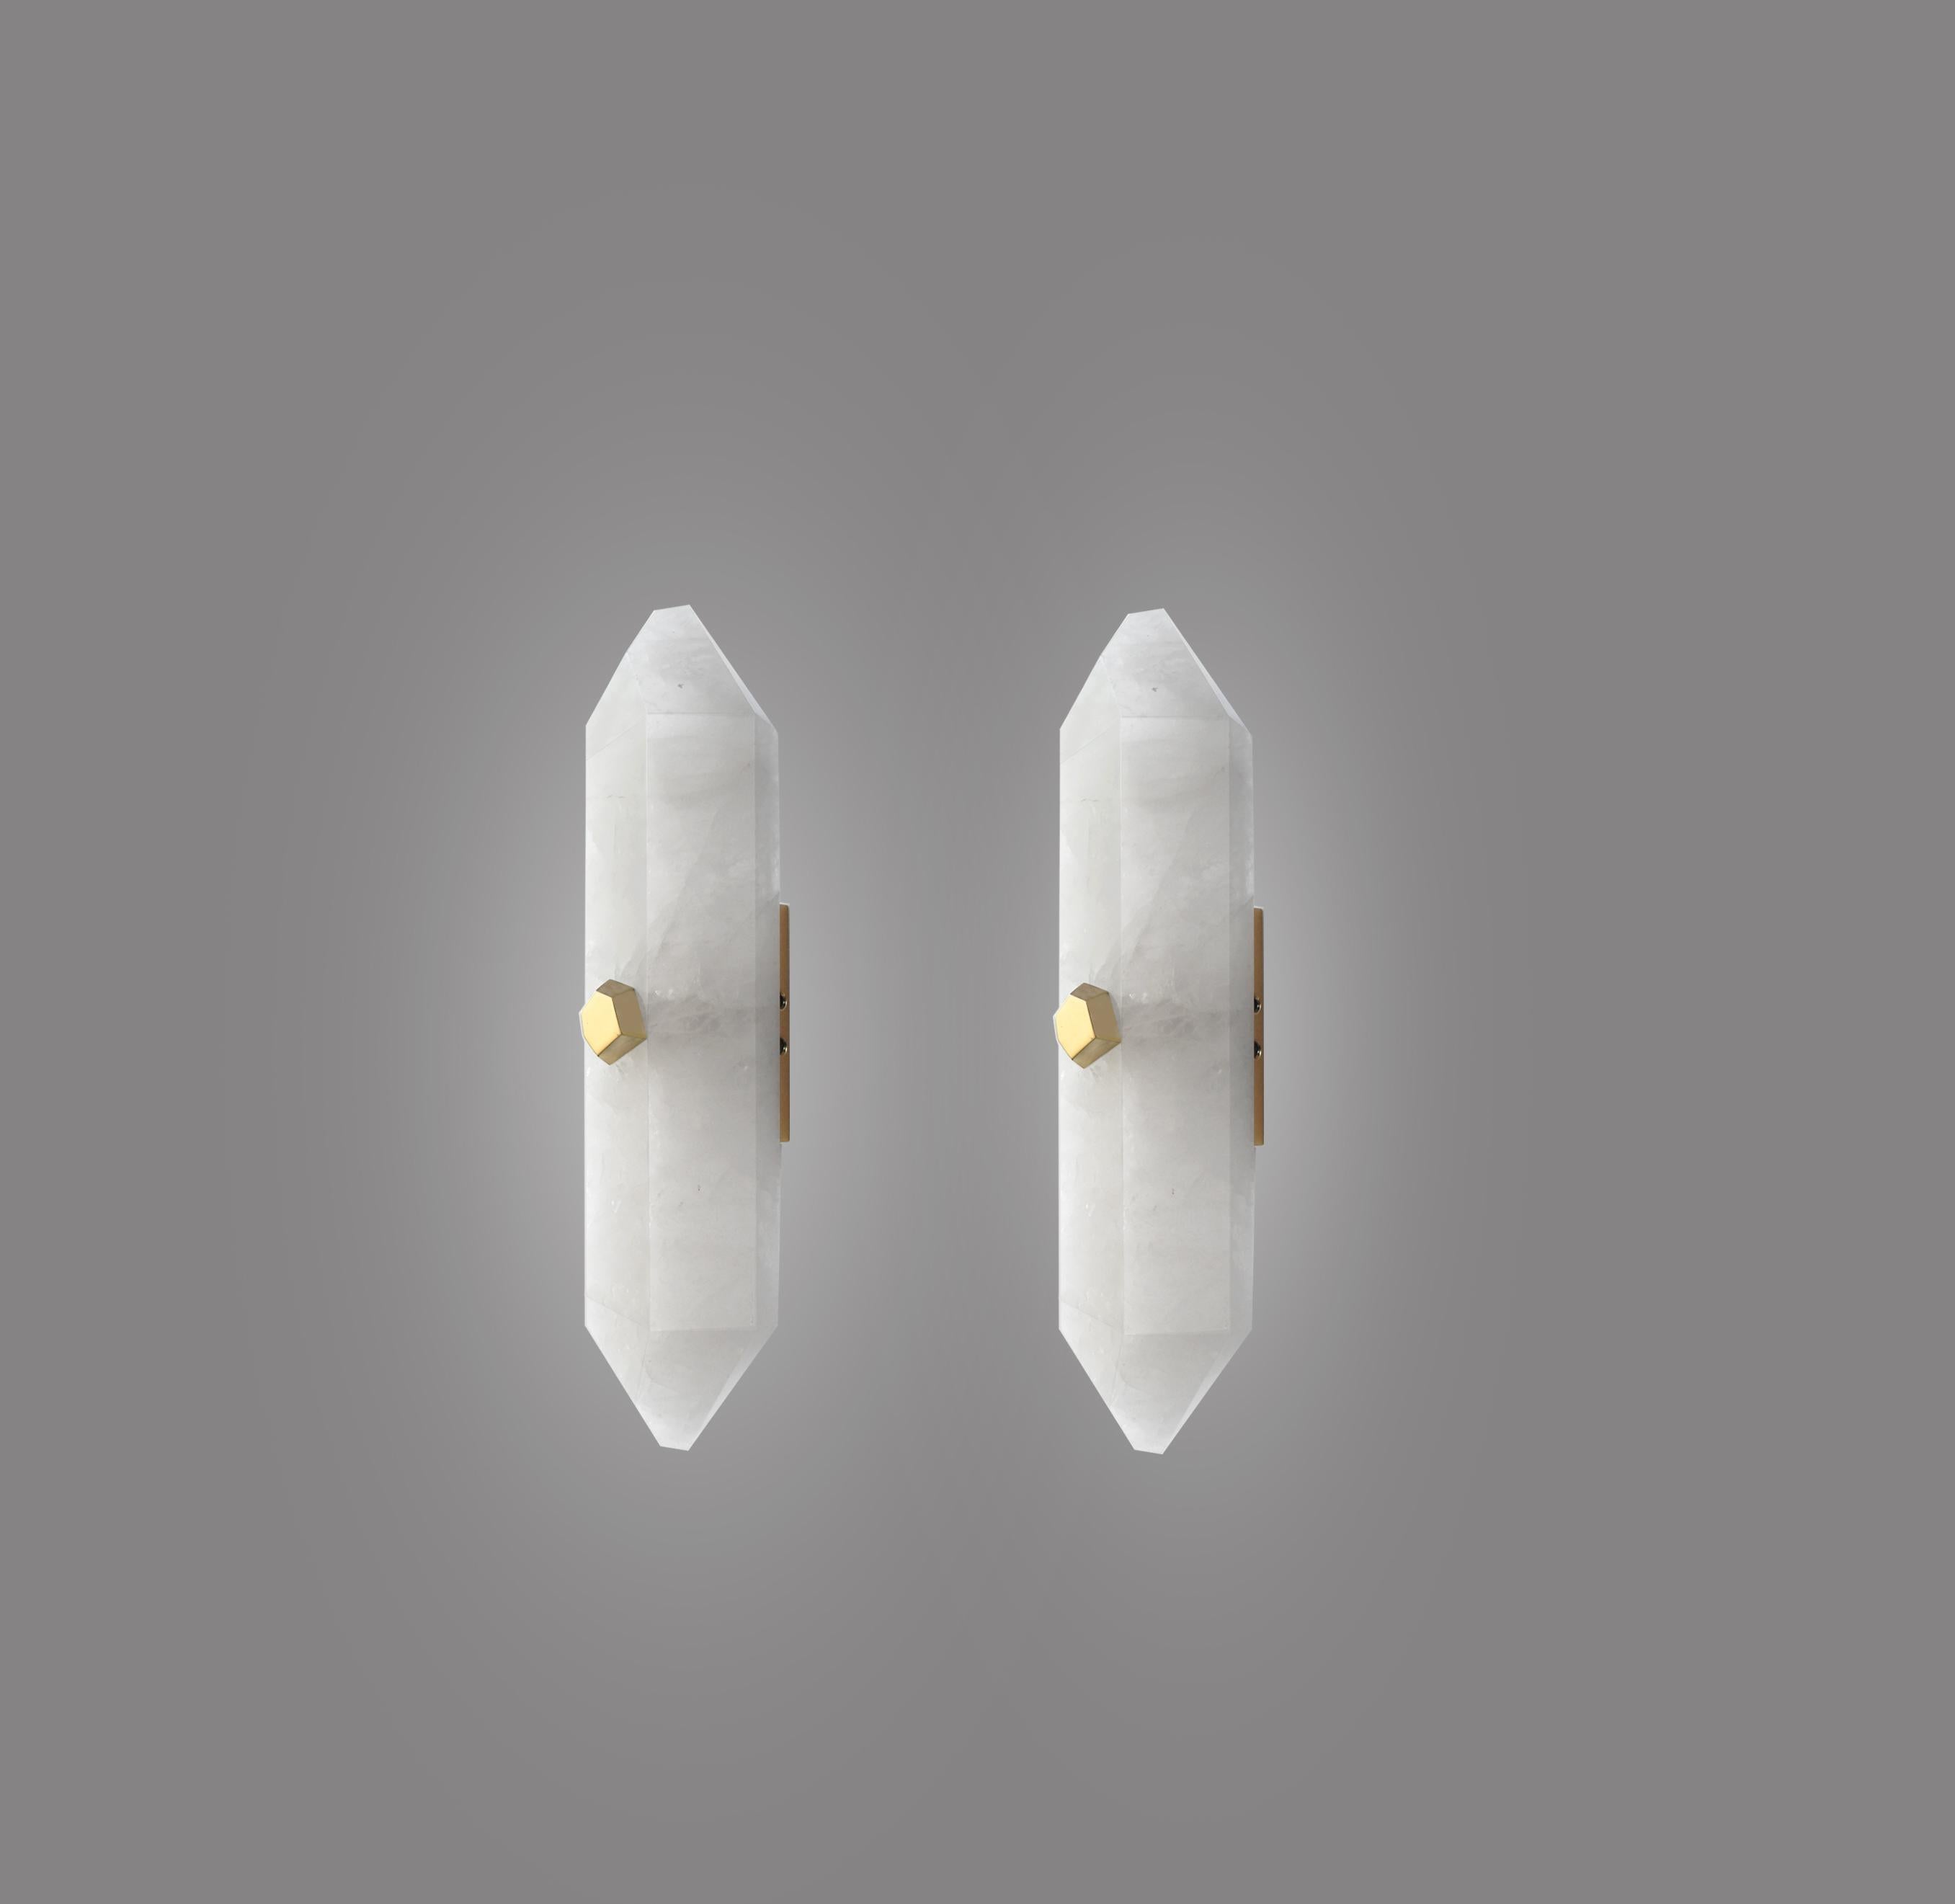 Pair of fine carved diamond form rock crystal sconces with the polish brass mounts. Each wall sconce is installed with two sockets, 60 watts max each socket, total 120-watt. Created by Phoenix Gallery NYC.
Custom size, finish, and quantity upon